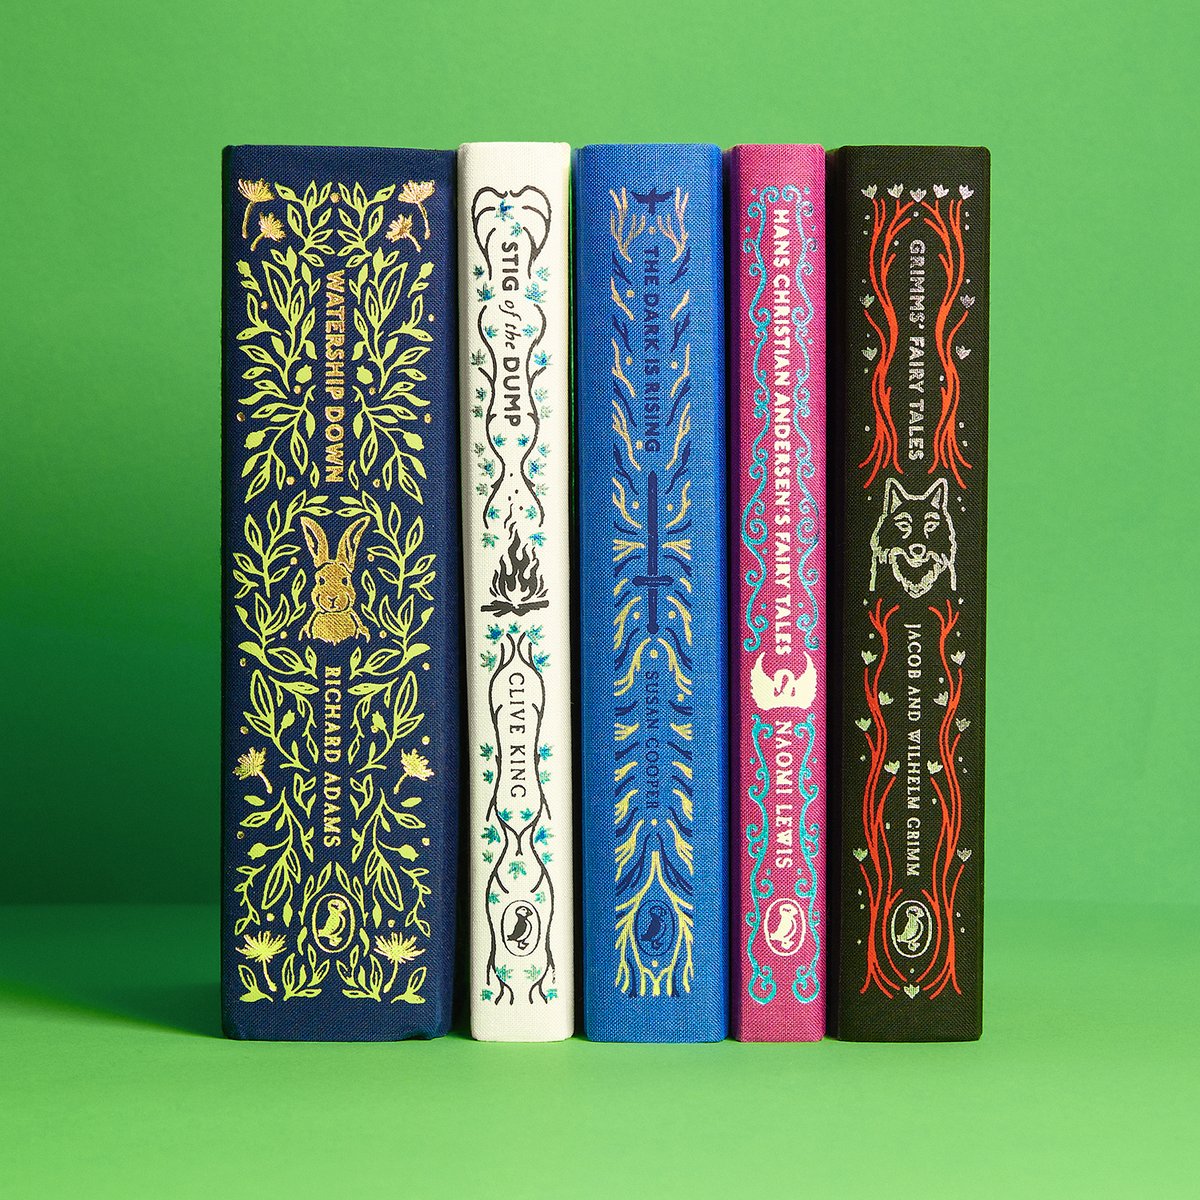 Psst... this GORGEOUS Puffin Clothbound Classics Collection is on sale right now 👀👉 bit.ly/3WbCpjD